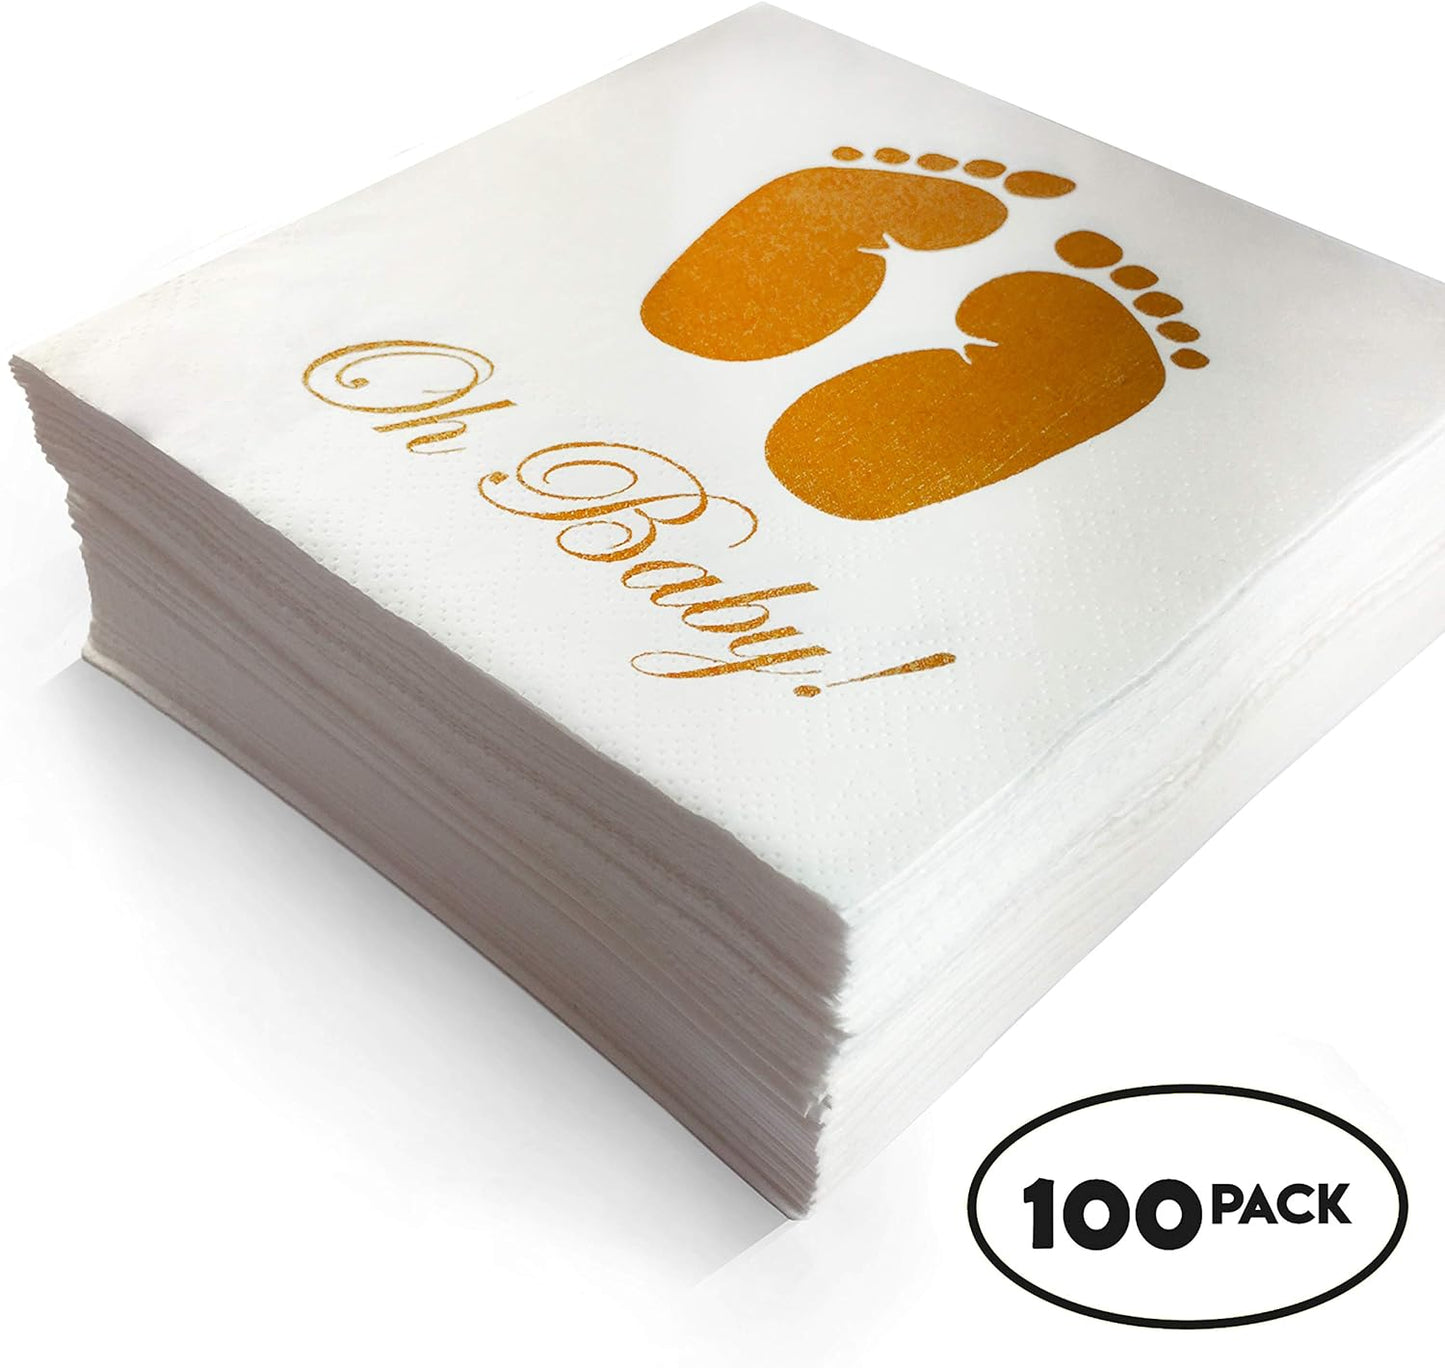 Elegant, 100 Pack, Baby Shower Napkins -Folded 5x5 inch, 3-PLY, Oh Baby Gold Feet Design for Boy and Girl, White Paper, Disposable Tableware Decorations Supply for Cocktail Dinner Lunch Birthday